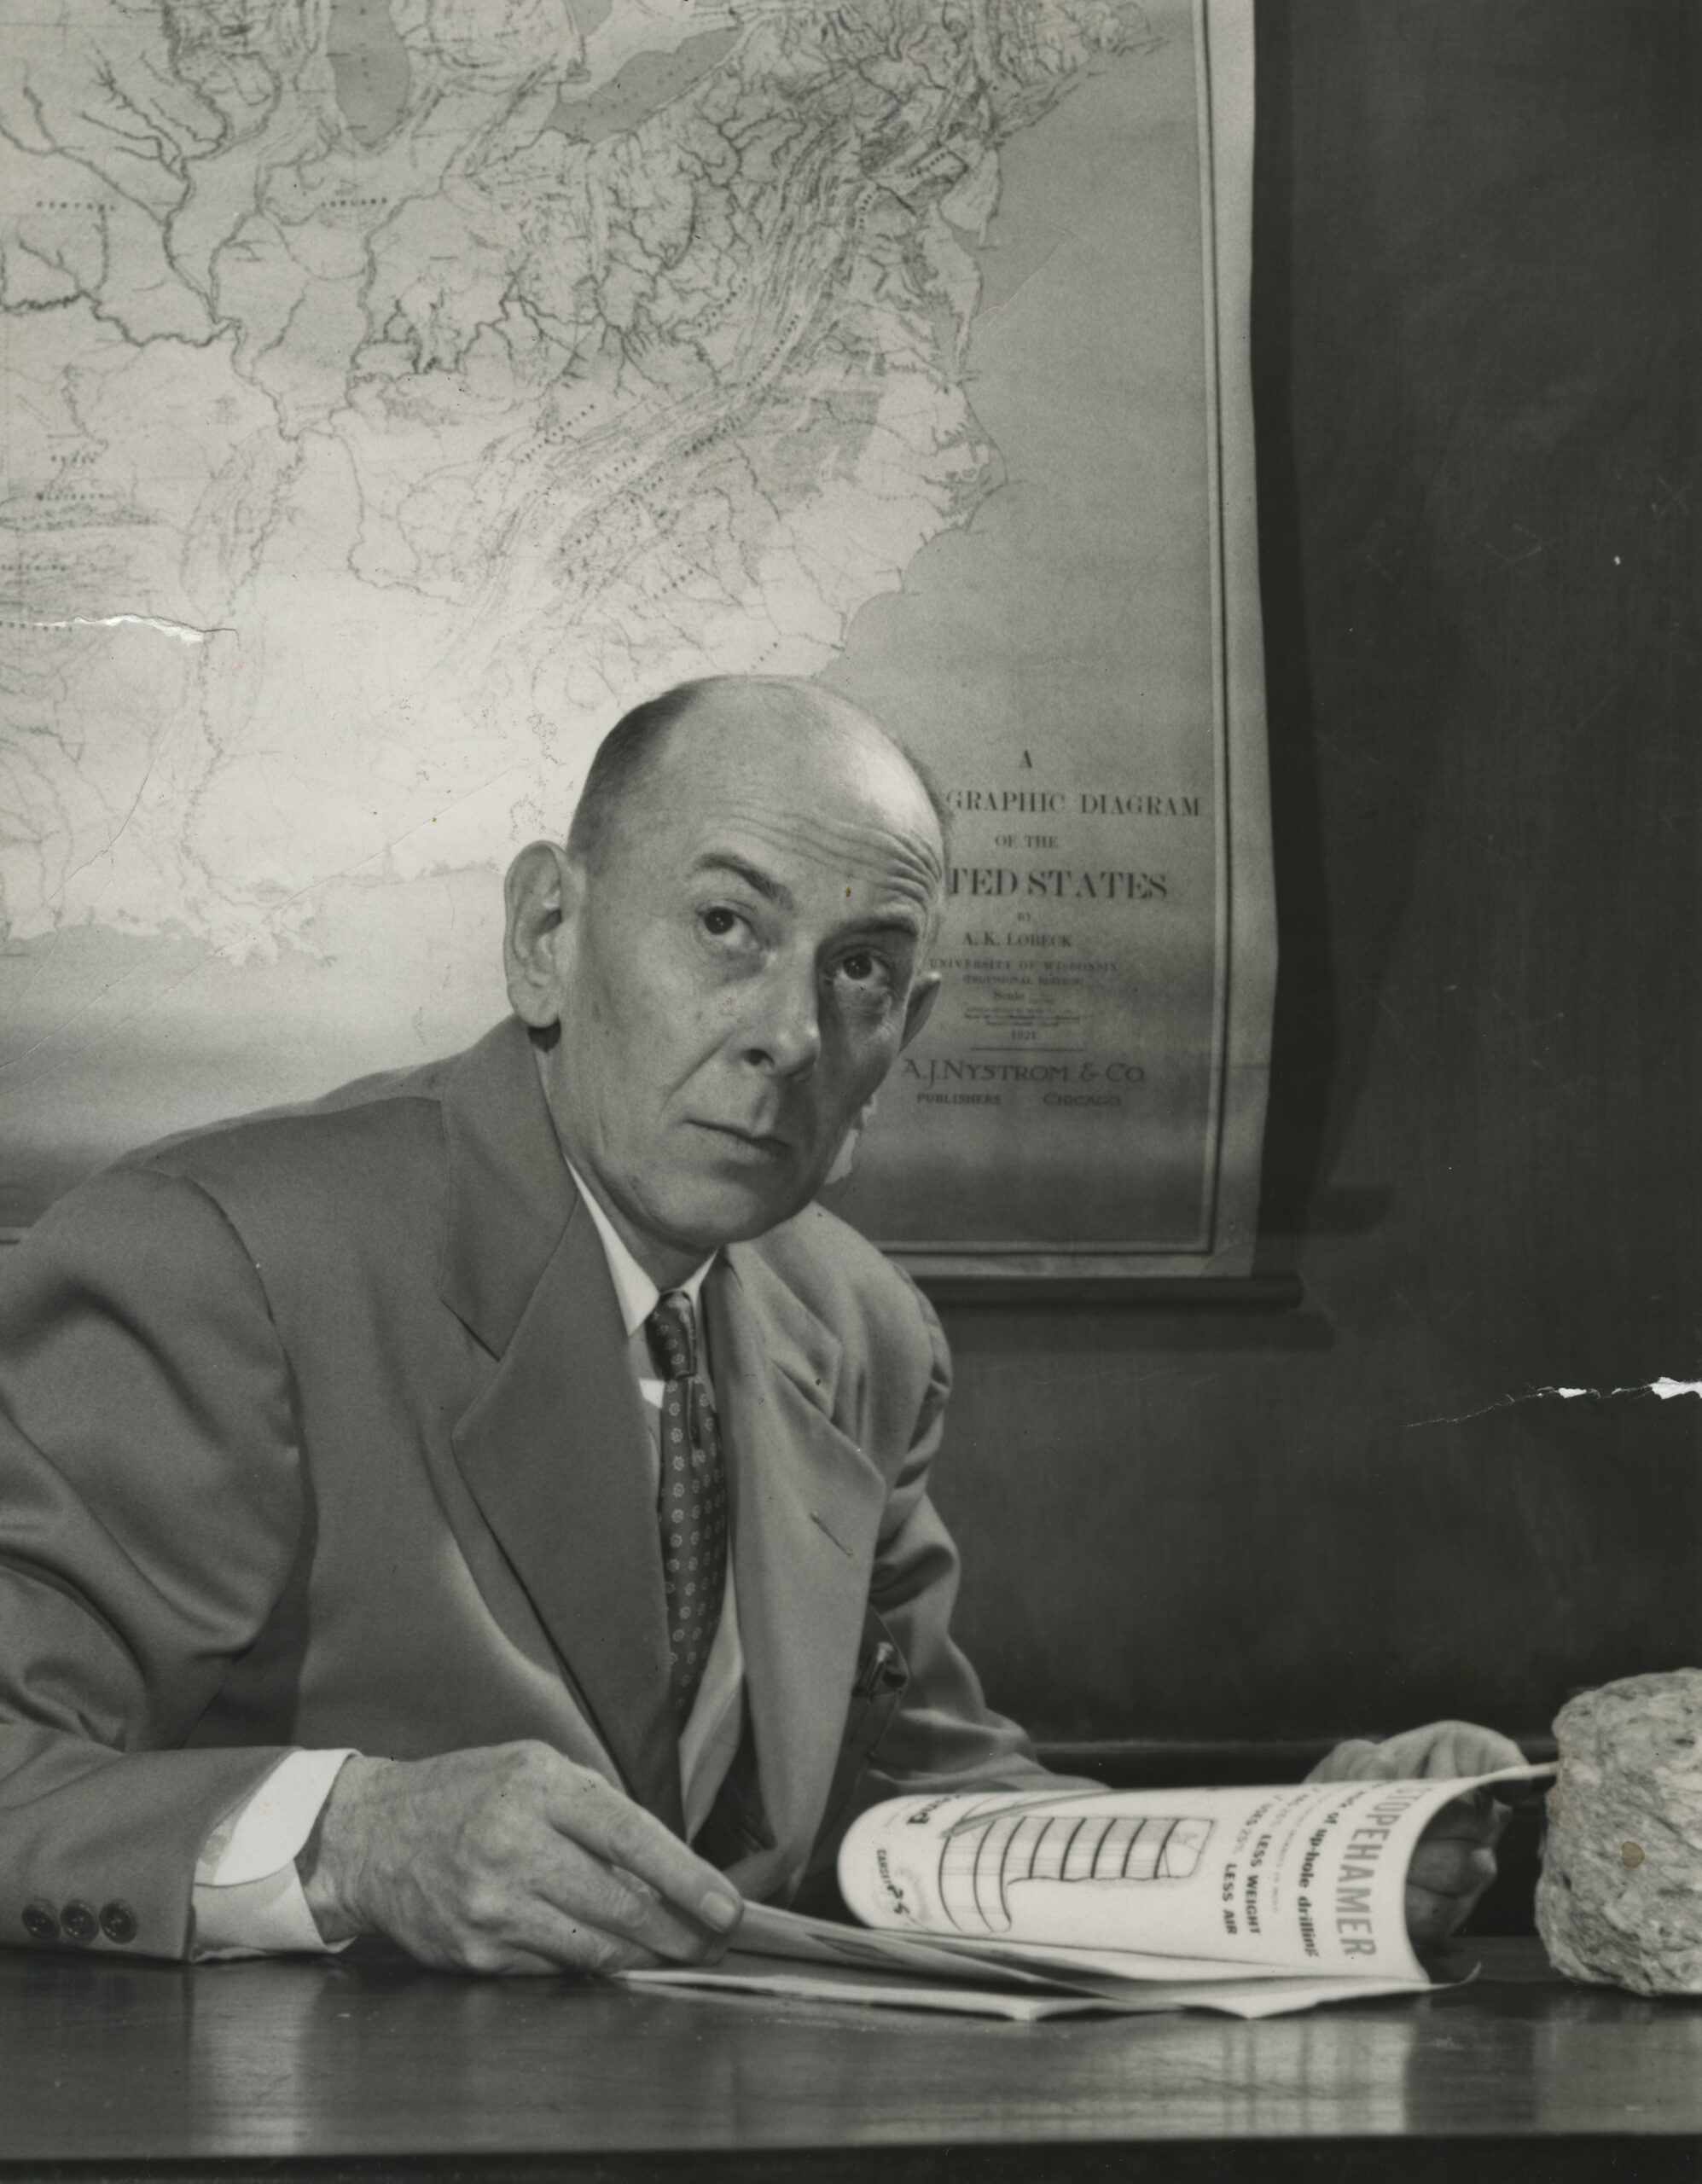 Willard Jewell looking up from his desk with a map behind him, greyscale.